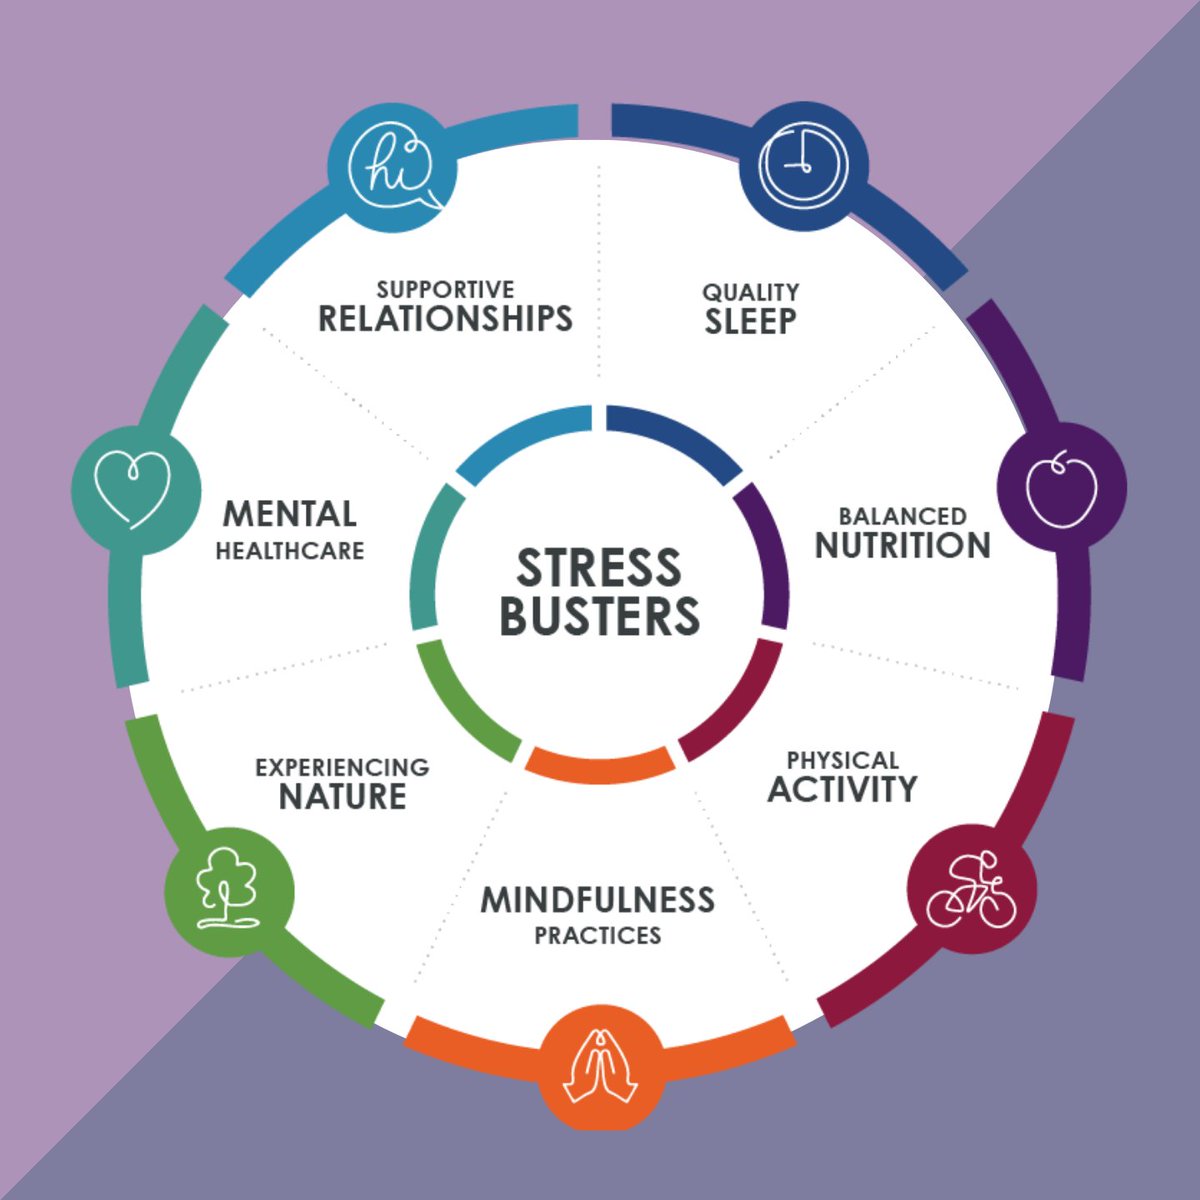 Stress Busters are seven, evidence-based strategies that help to manage day-to-day stress, as well as counter toxic stress from ACEs. Learn more in the CA Surgeon General's Playbook for Stress: osg.ca.gov/wp-content/upl…